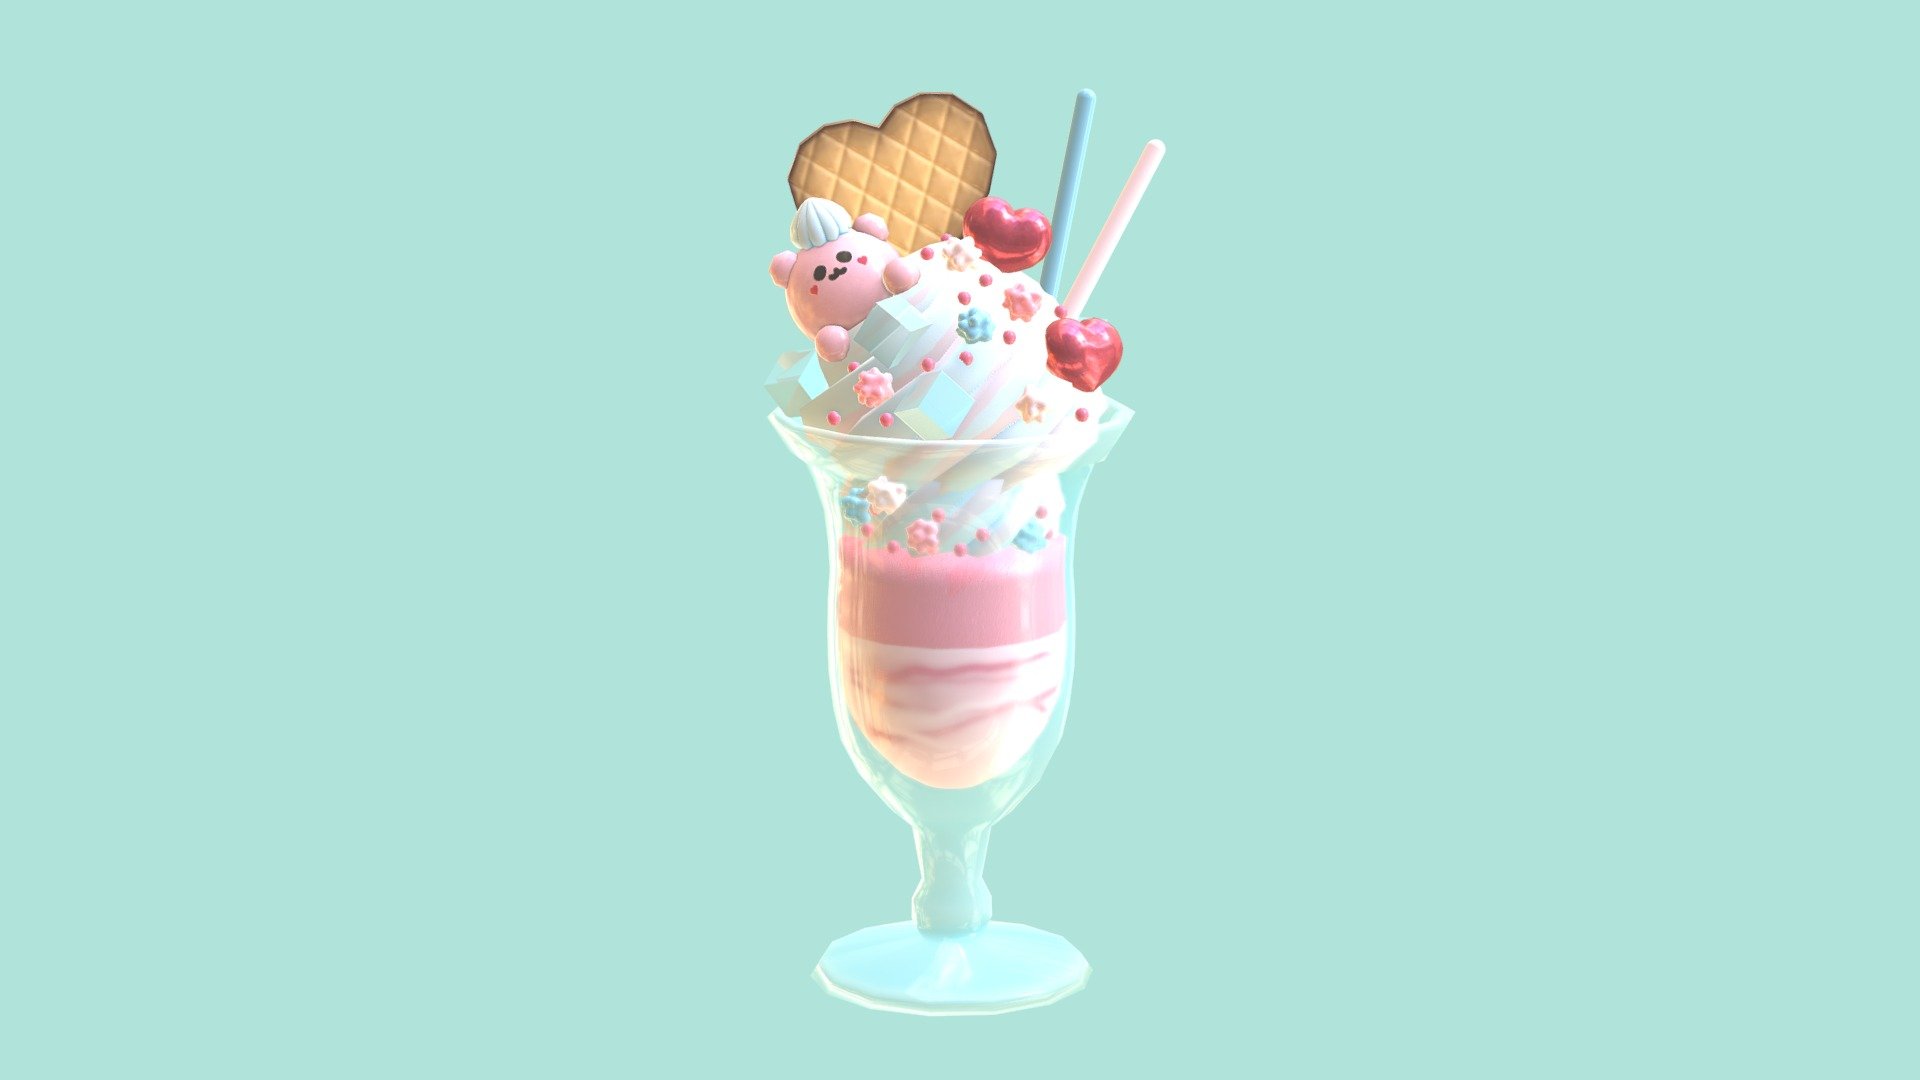 Made for the sketchfab weekly challenge! - Heart Bear Valentines Parfait - 3D model by icebell (@icedbell) 3d model